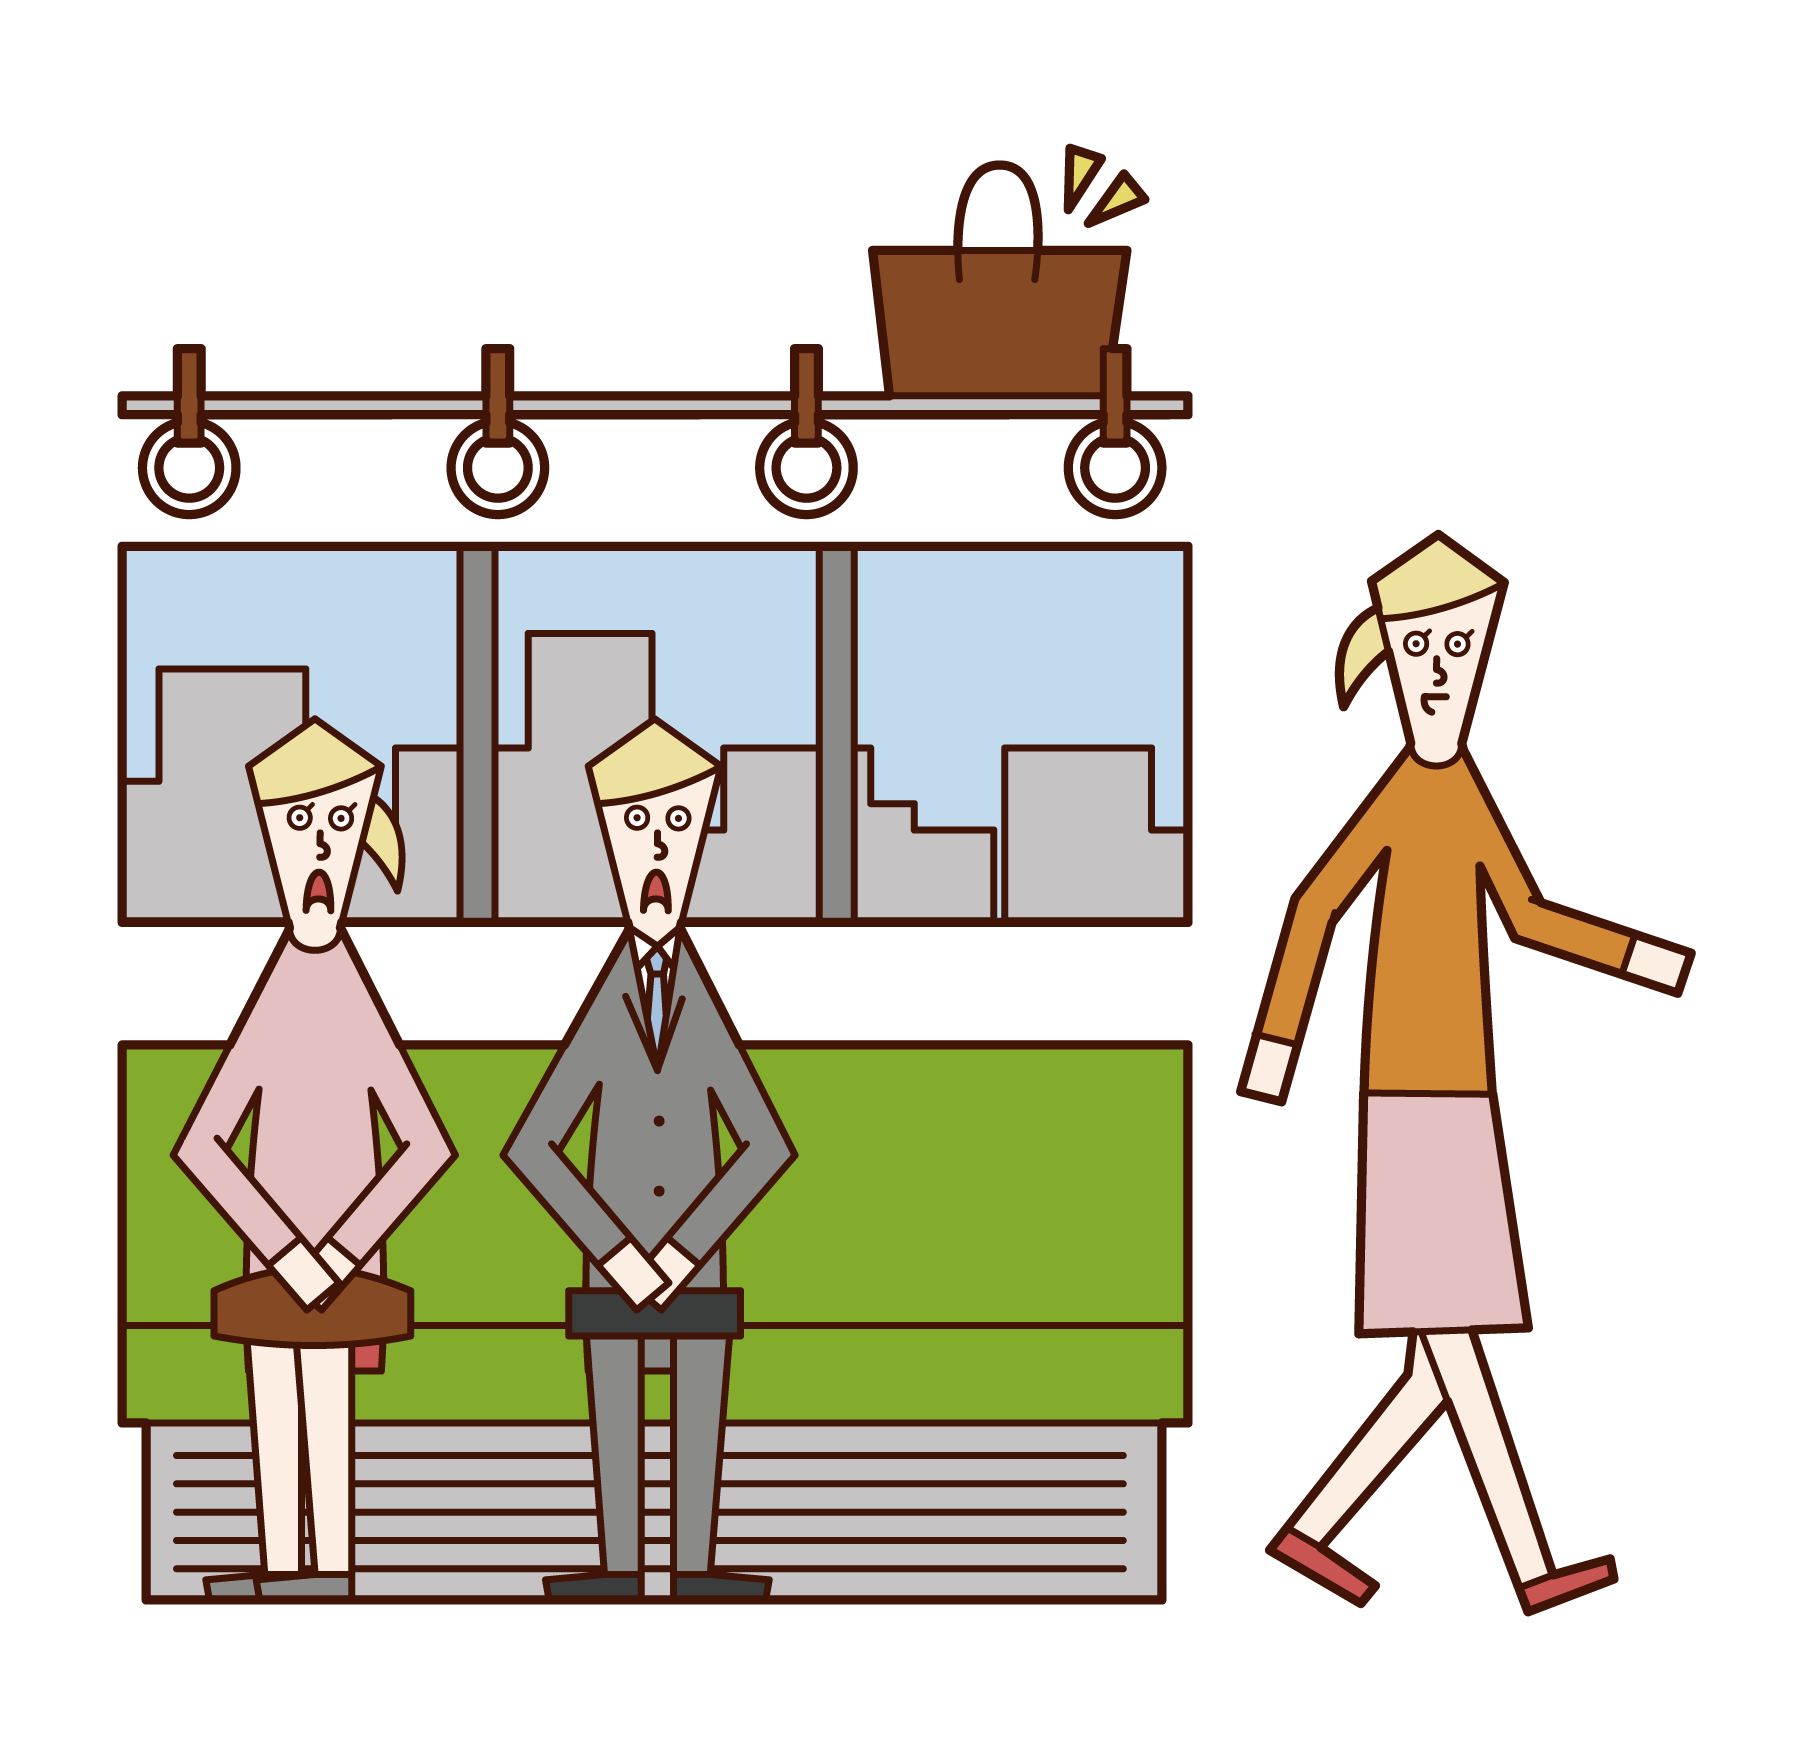 Illustration of a woman who left her luggage on a train